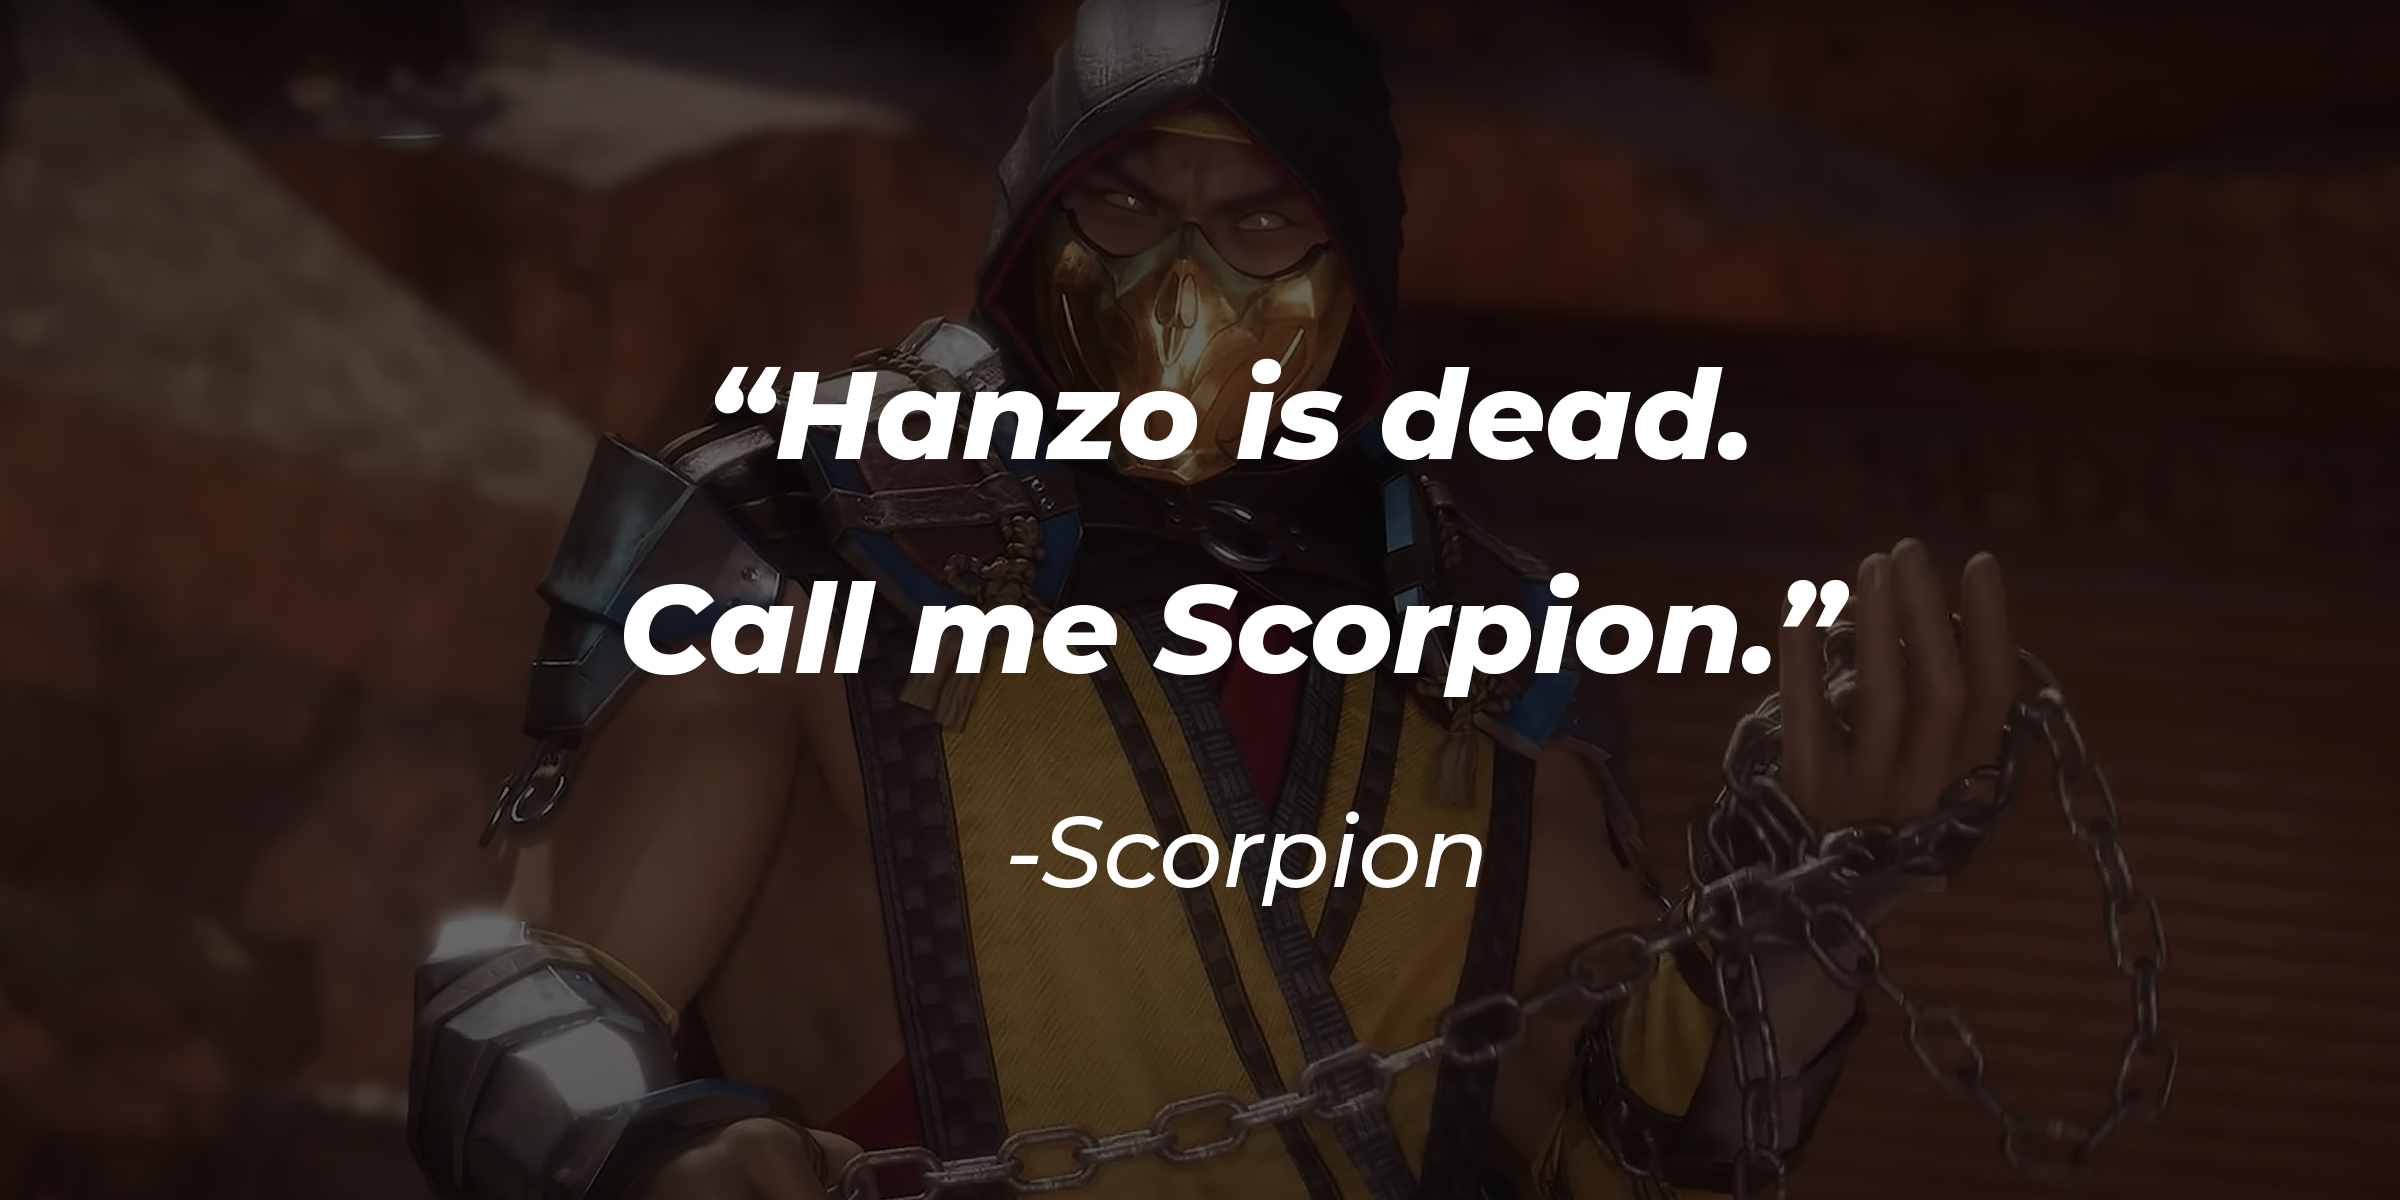 An image of Scorpion with his quote: "Hanzo Hasashi is dead. I am Scorpion." |Source: facebook.com/MortalKombatUK